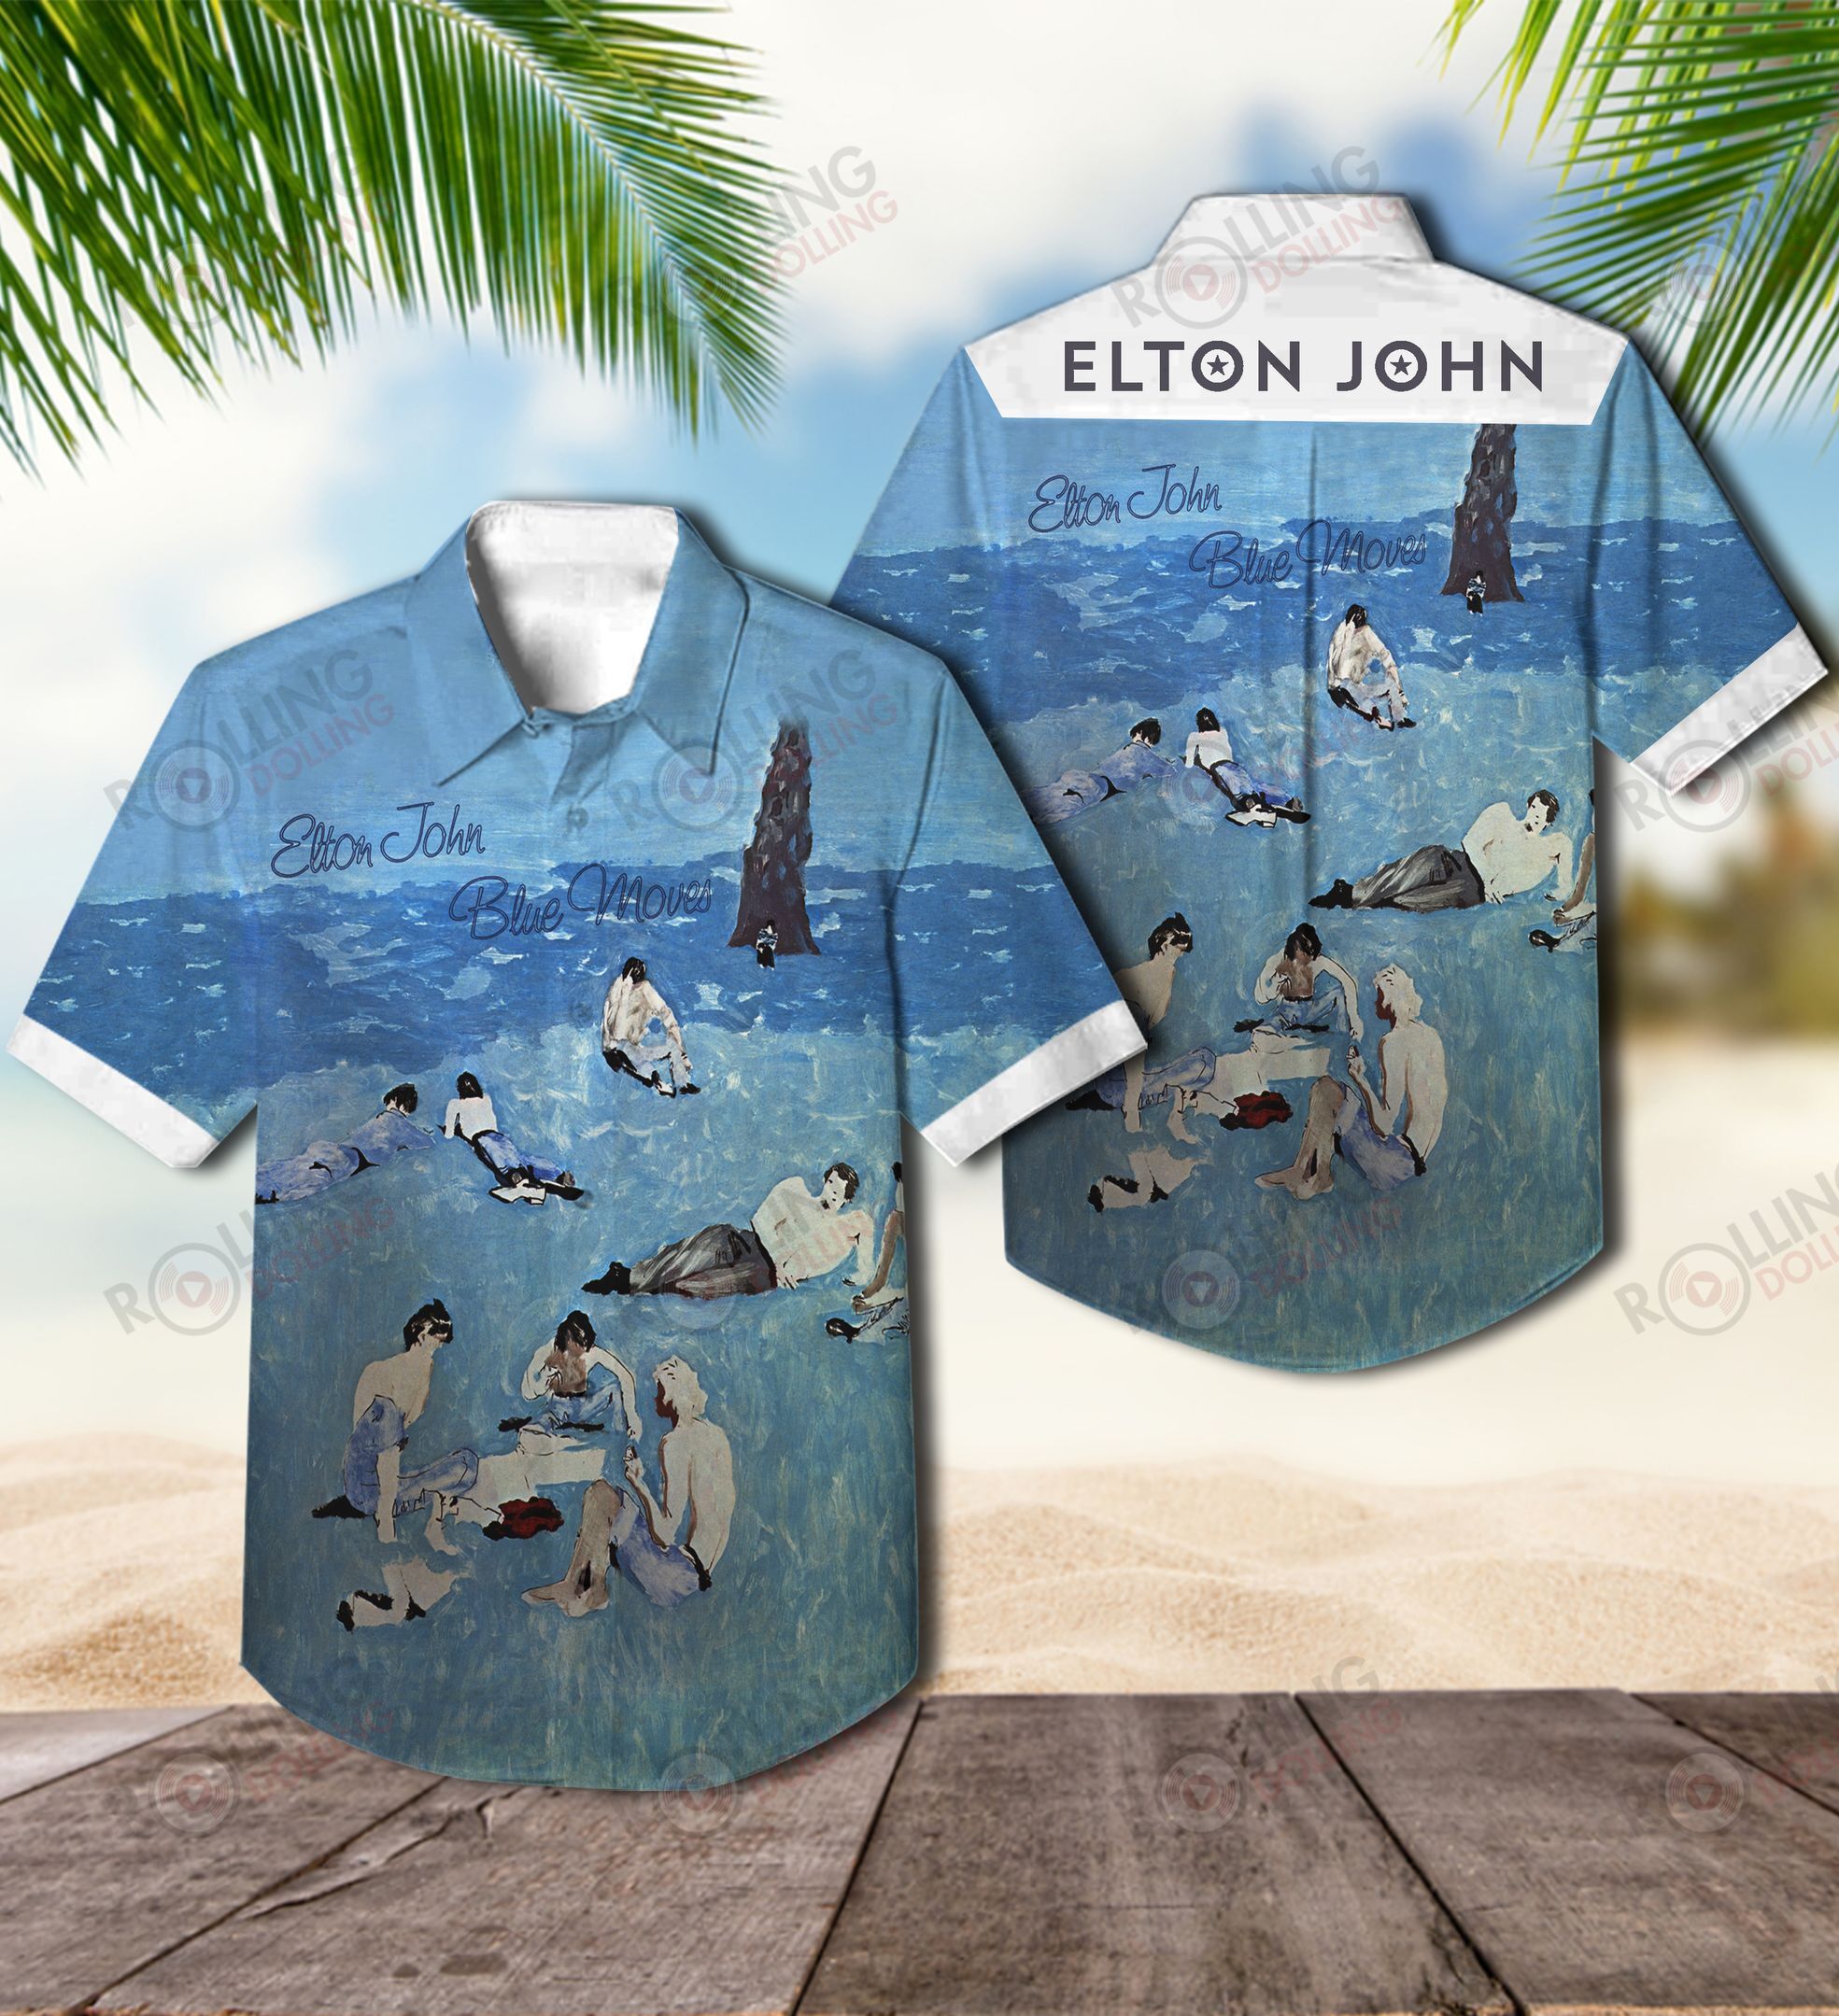 This would make a great gift for any fan who loves Hawaiian Shirt as well as Rock band 76